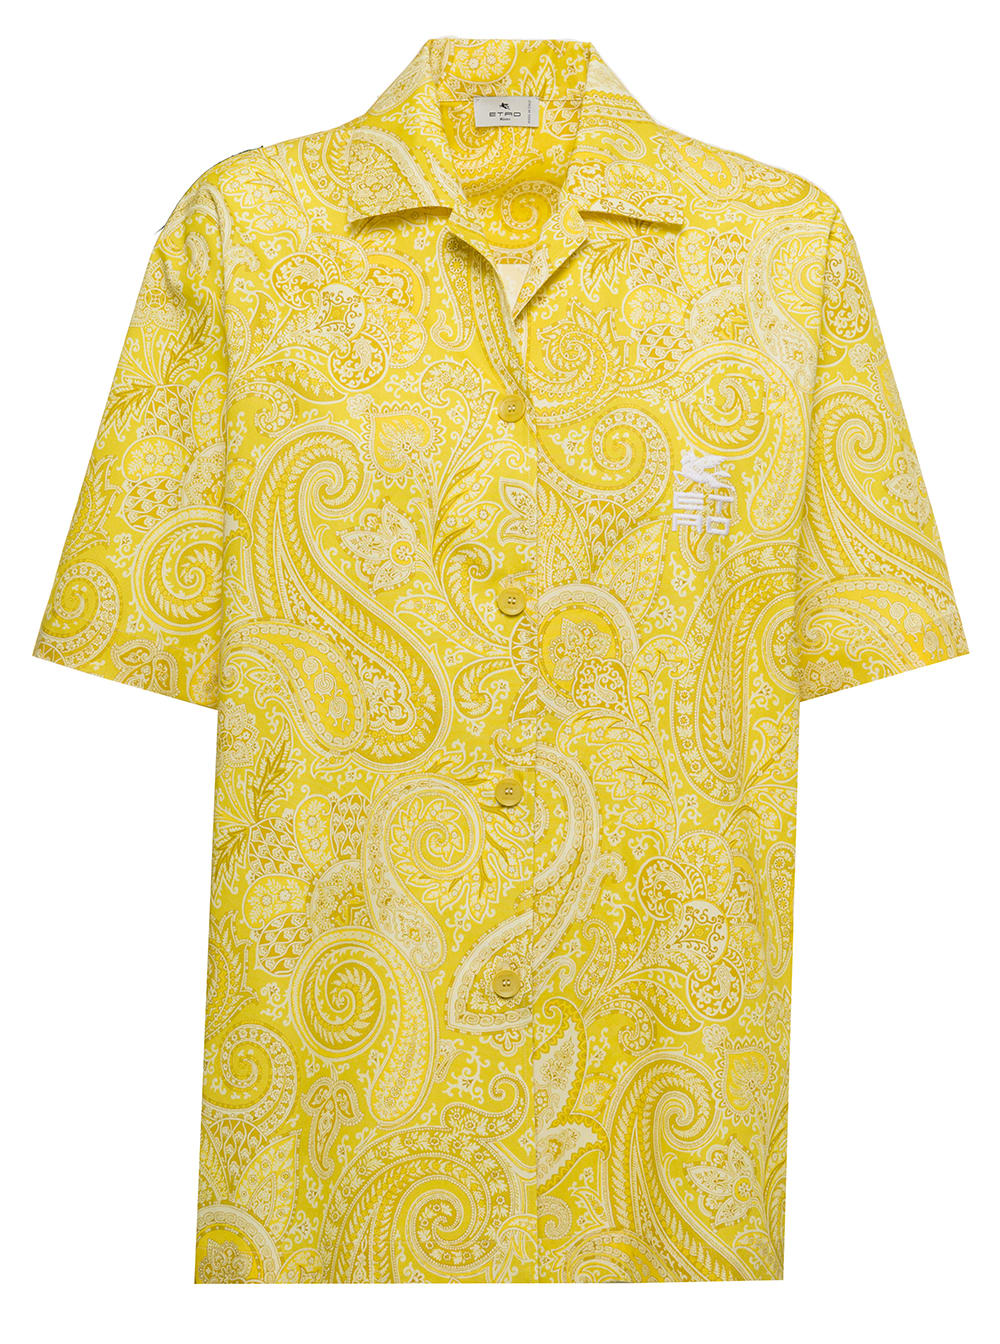 Etro Womans Yellow Cotton Pailsey Printed Bowling Shirt